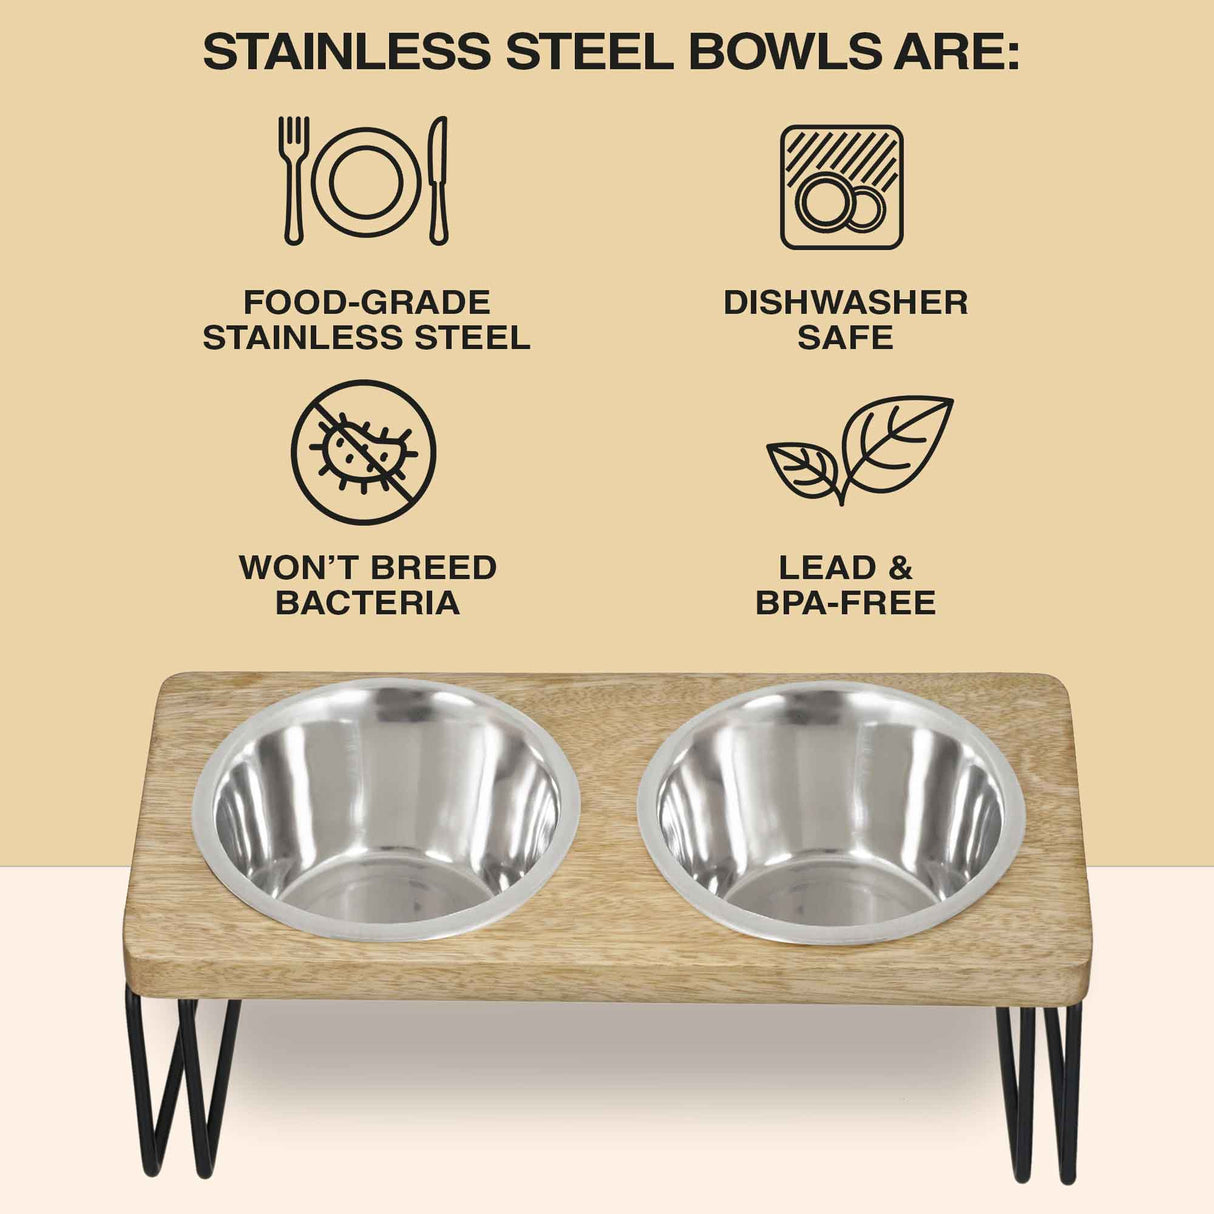 Image explaining benefits of using stainless steel bowls - food grade, dishwasher safe, won't breed bacteria, and BPA and lead free